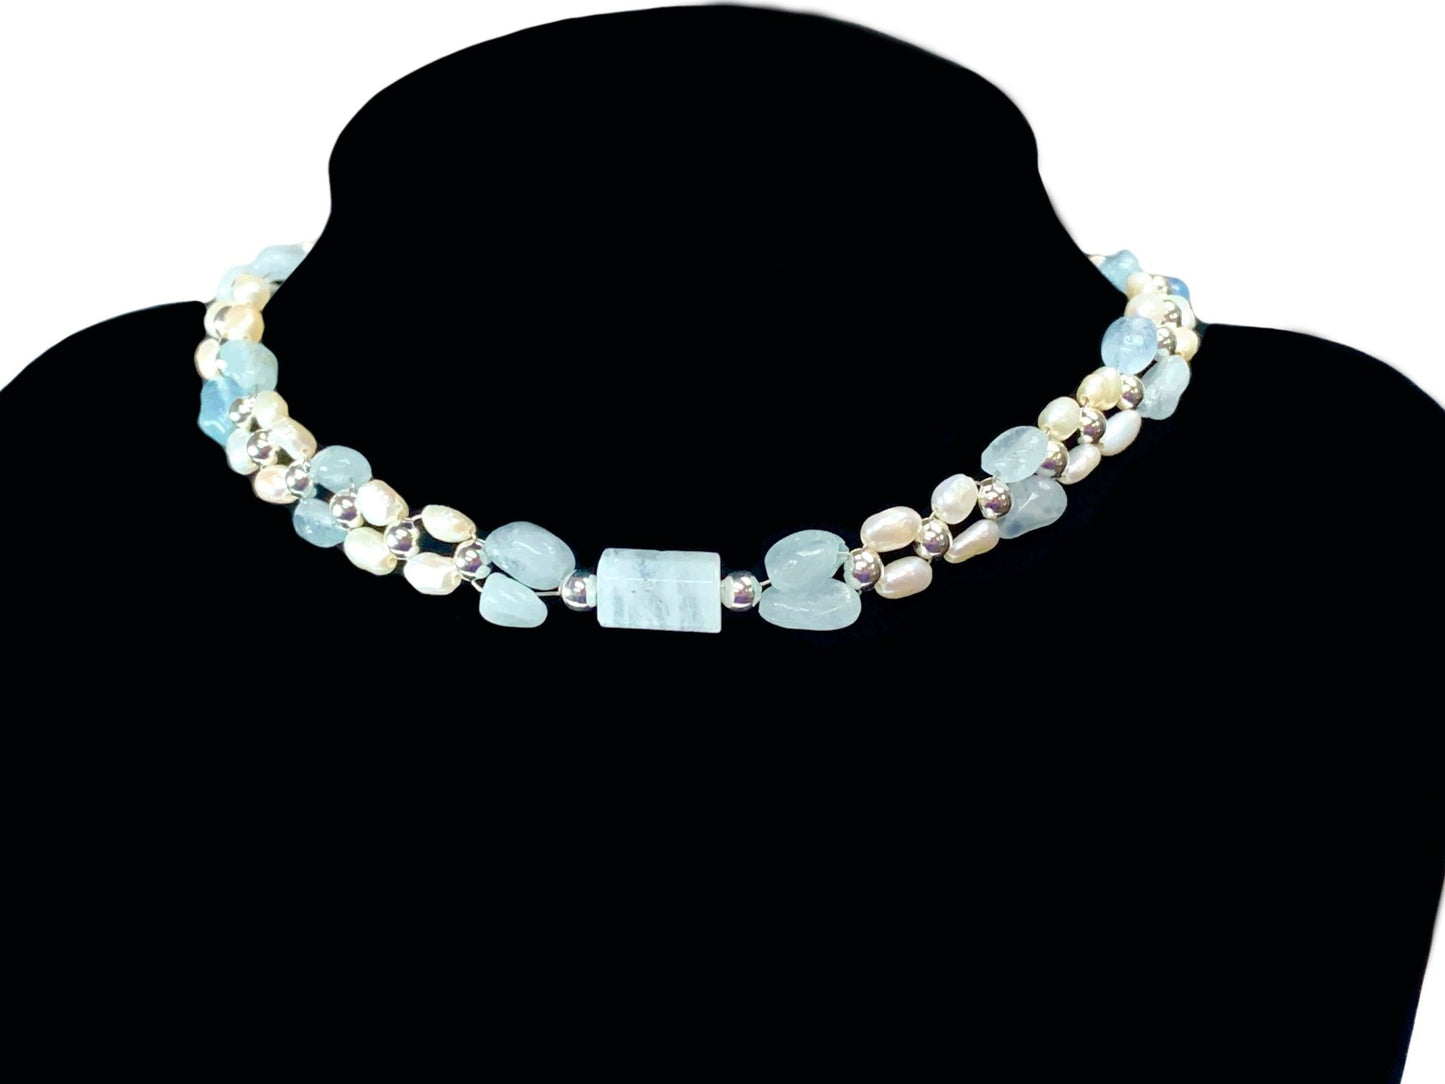 🔴SOLD🔴Marcelline Handmade Authentic Aquamarine and Cultured Rice Pearl Necklace/ Choker - Born Mystics